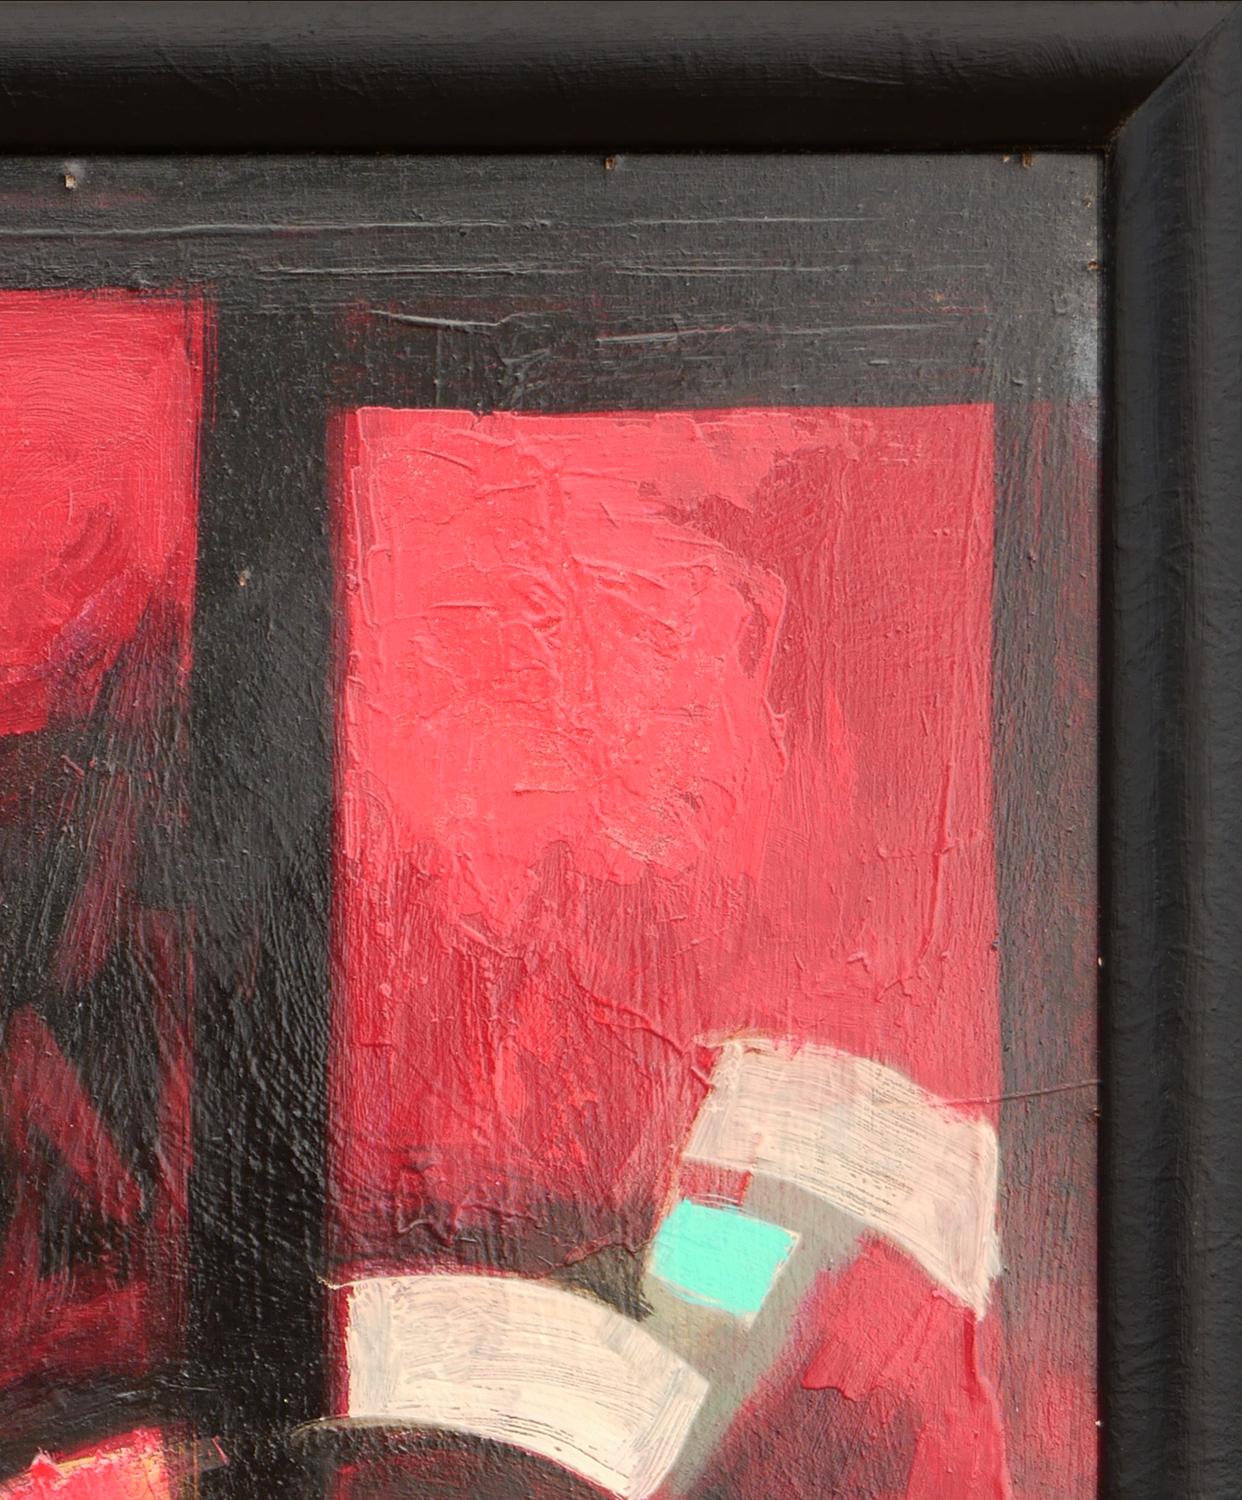 Warm toned modern cubist abstract painting by Houston, TX artist David Adickes. The work features red, white, and aqua geometric shapes set against a black background. Currently hung in a black floating frame.

Dimensions Without Frame: H 20.5 in. x